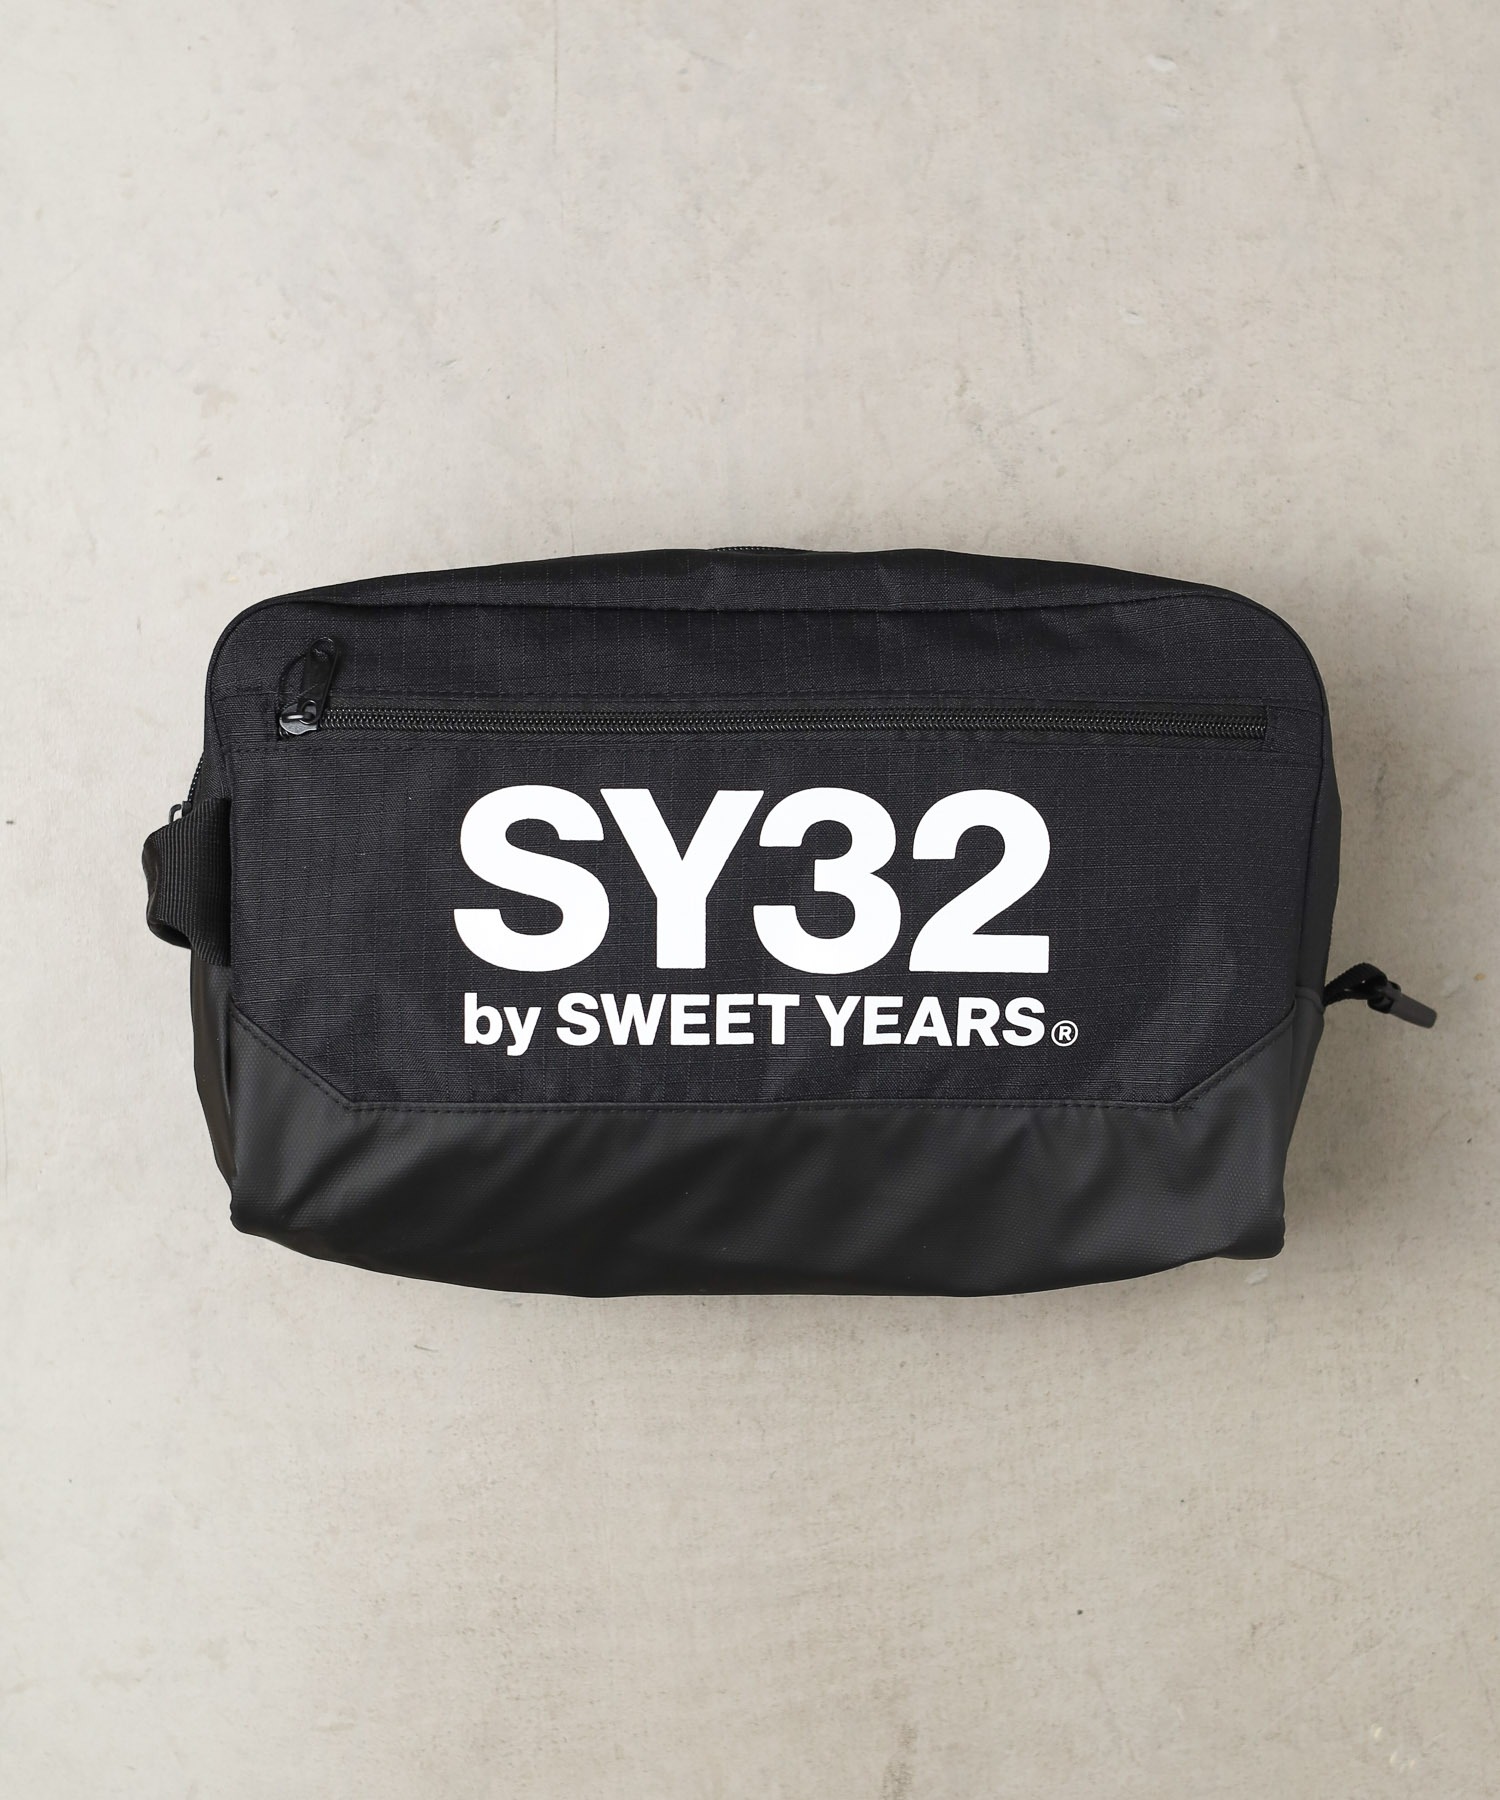 SY32 大決算セール by SWEET YEARS》MULTI BOX 値引きする YEARS《SY32